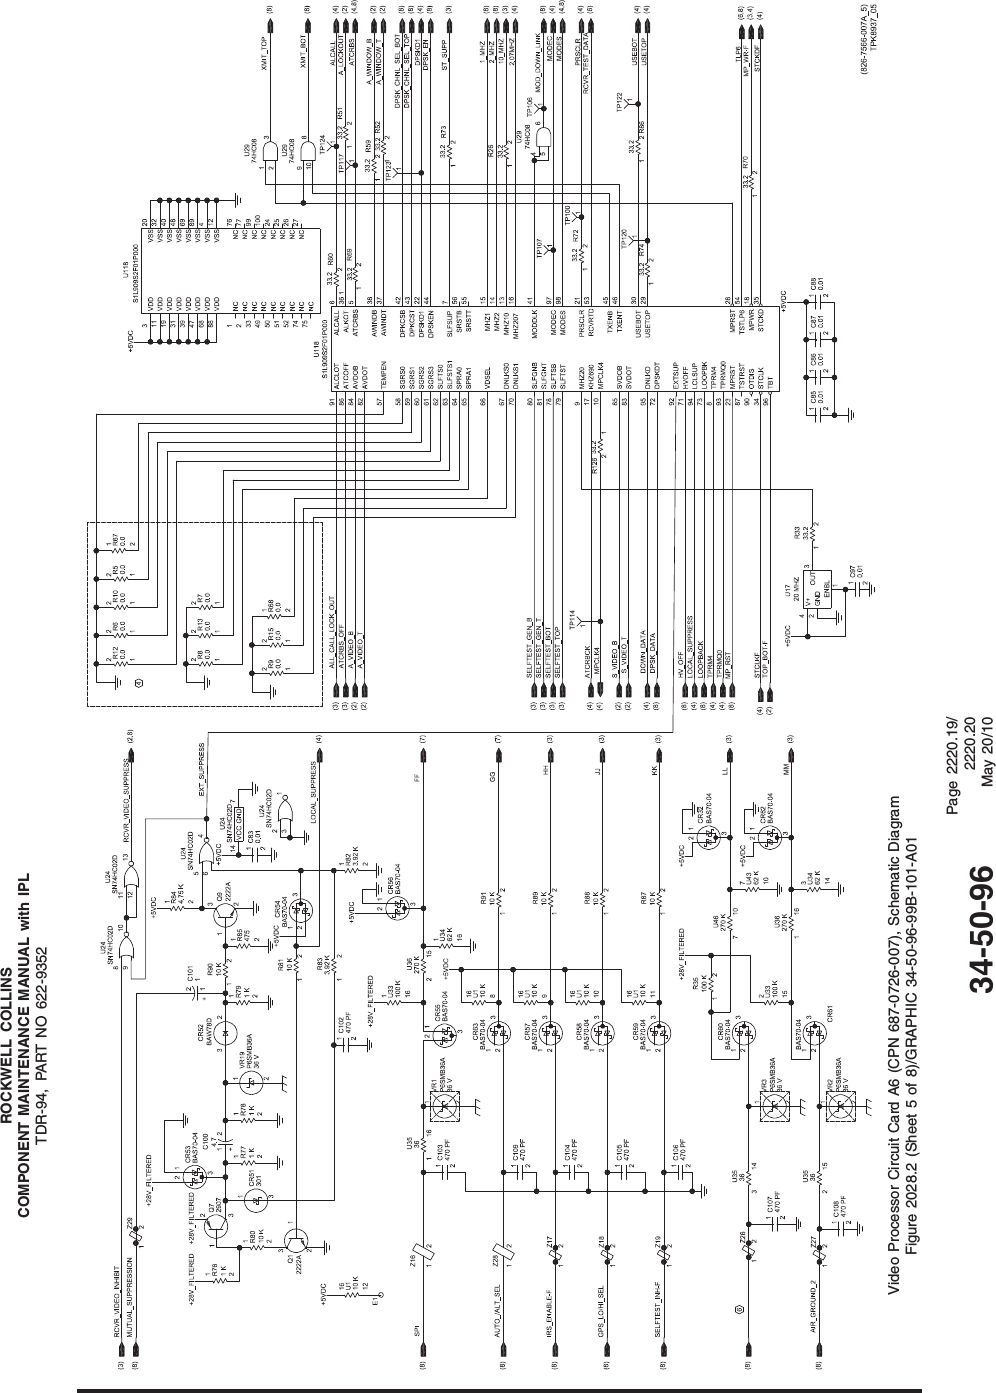 ROCKWELL COLLINSCOMPONENT MAINTENANCE MANUAL with IPLTDR-94, PART NO 622-9352Video Processor Circuit Card A6 (CPN 687-0726-007), Schematic DiagramFigure 2028.2 (Sheet 5 of 8)/GRAPHIC 34-50-96-99B-101-A0134-50-96Page 2220.19/2220.20May 20/10